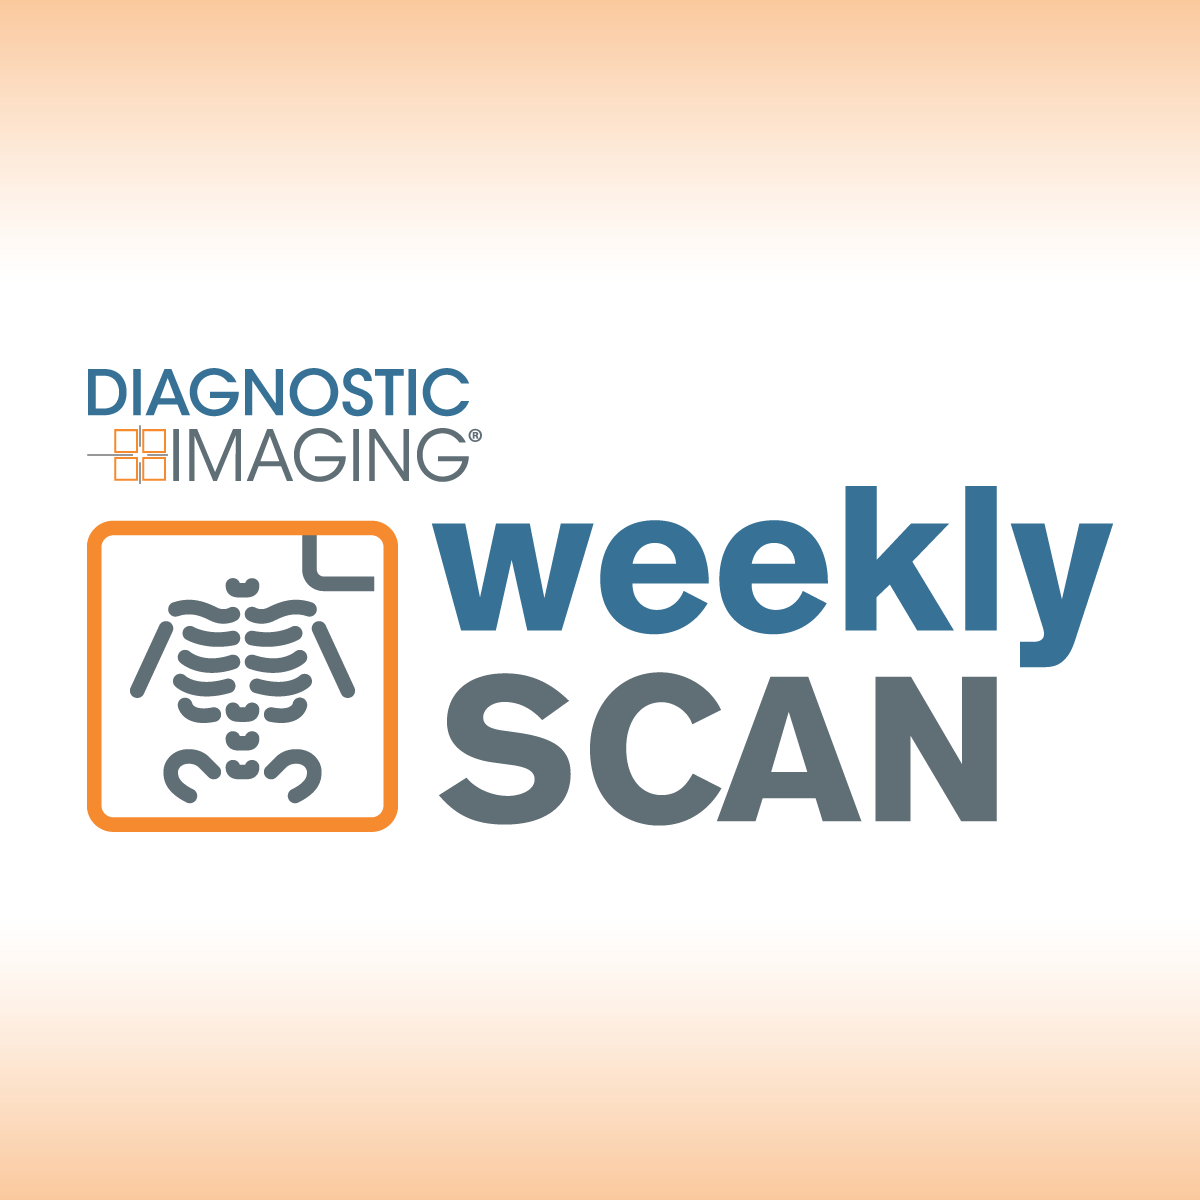 Diagnostic Imaging's Weekly Scan: March 3-March 9